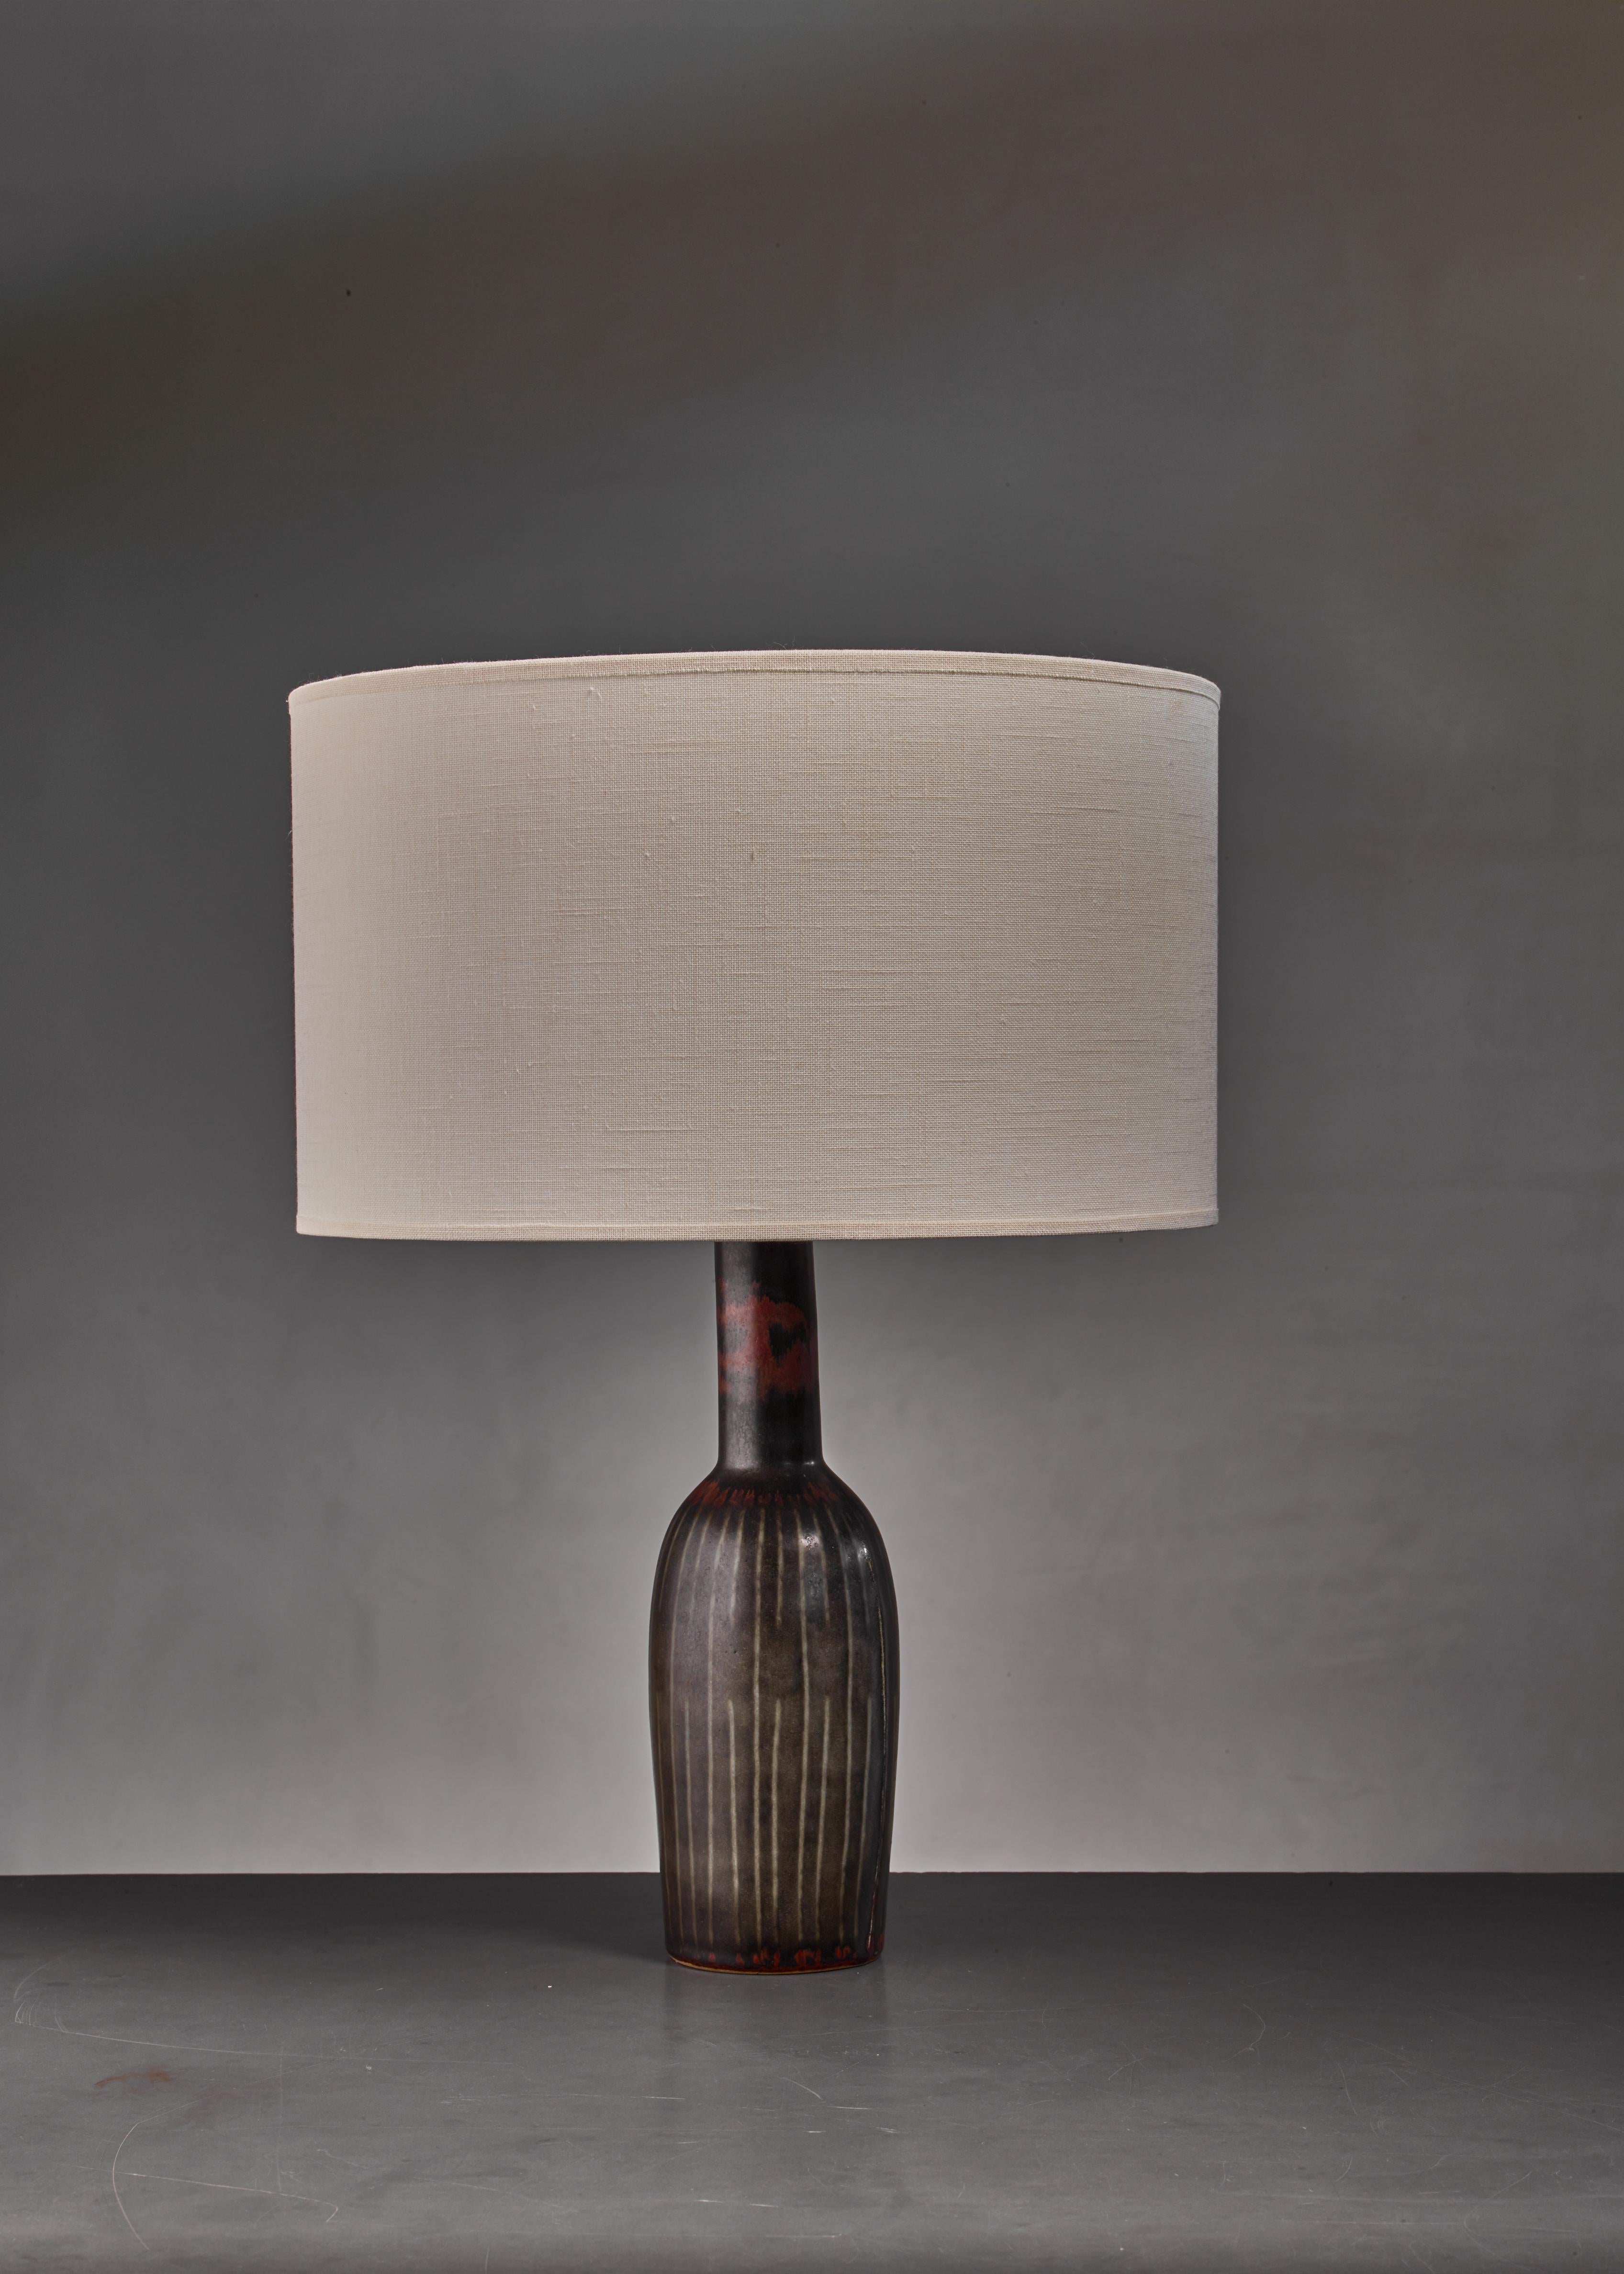 A dark green and brown ceramic table lamp by Carl-Harry Stålhane for Rörstrand.

Marked by Stålhane and Rörstrand. The measurements stated are of the lamp without the fabric shade.